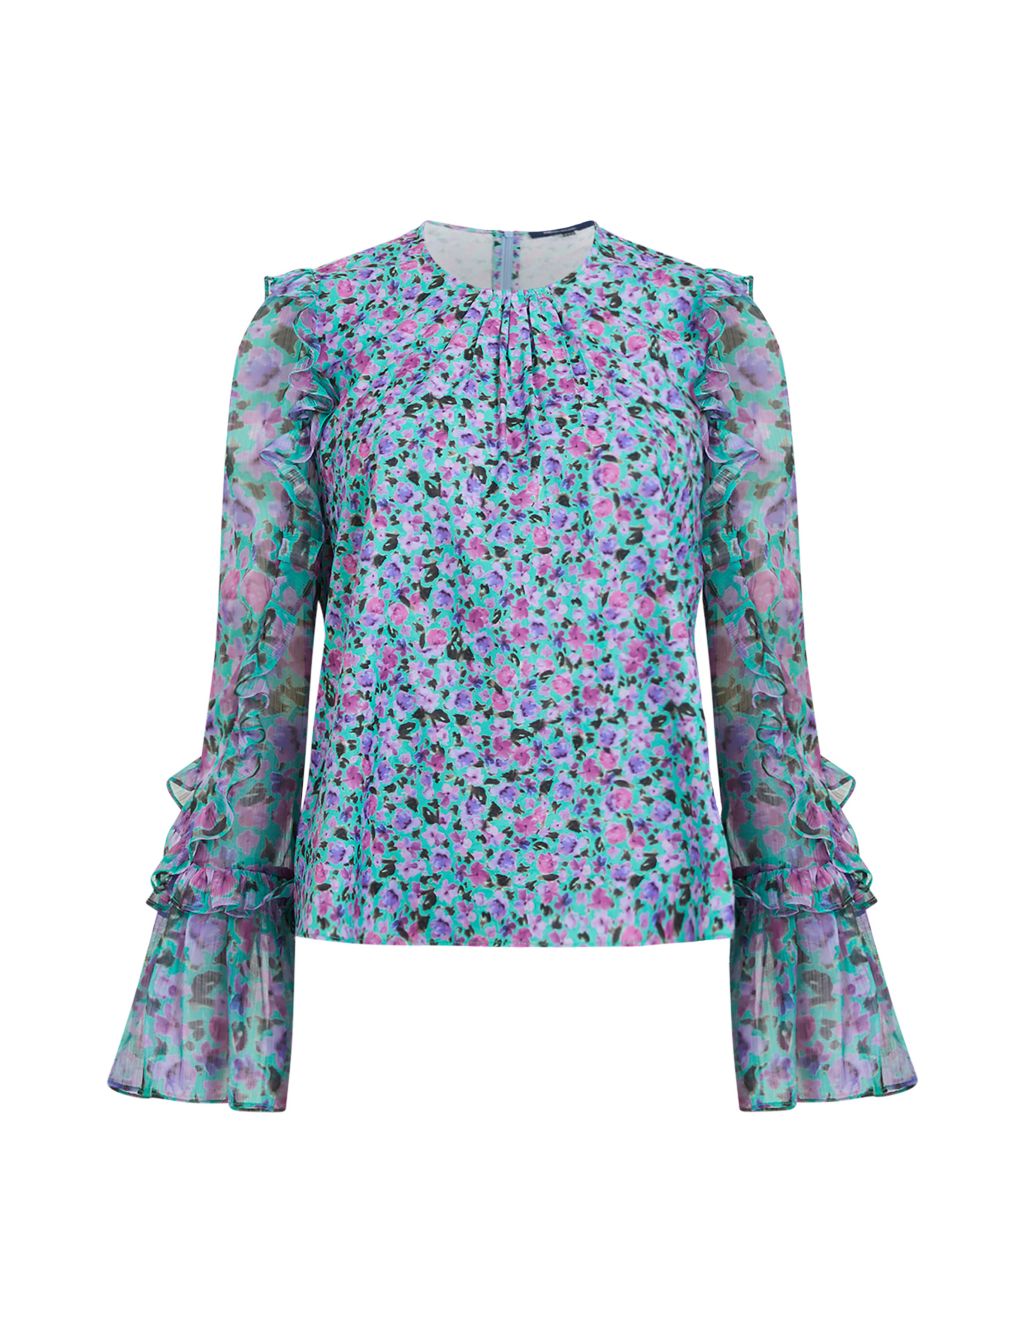 Floral Round Neck Frill Detail Blouse image 2